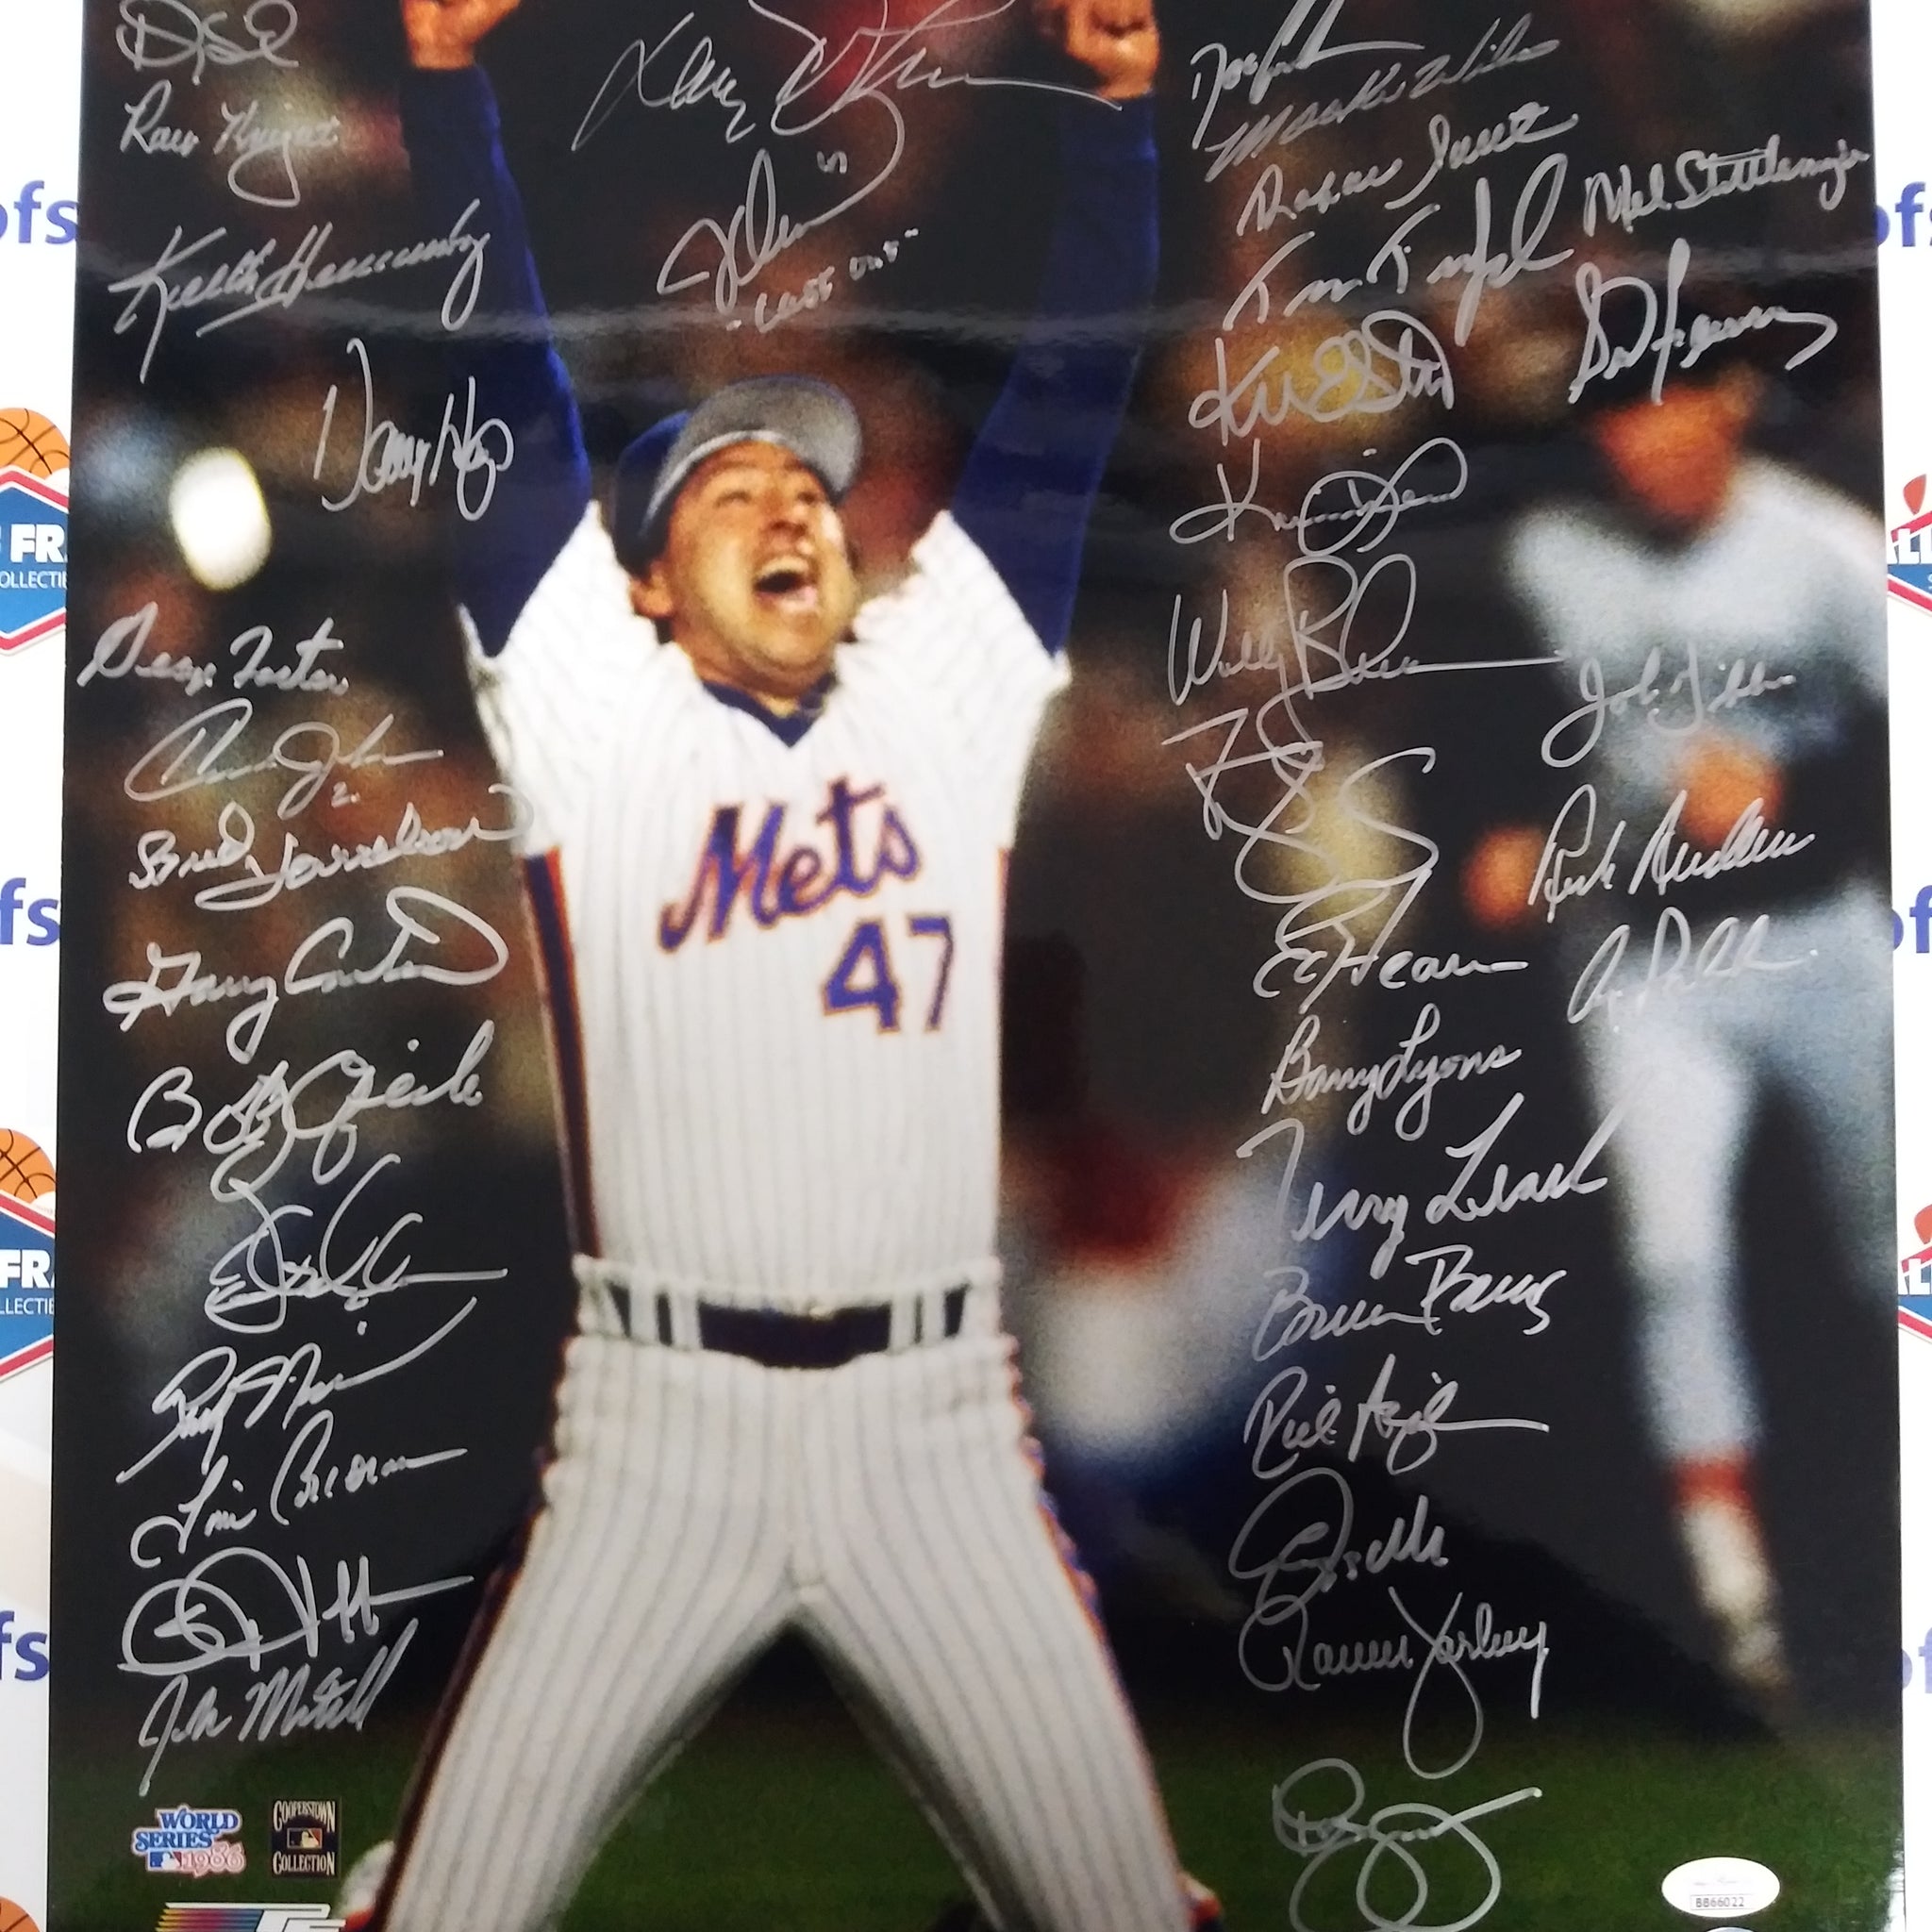 NEW YORK METS 1986 WORLD SERIES TEAM SIGNED 16X20 W/ CARTER 35 + SIGS